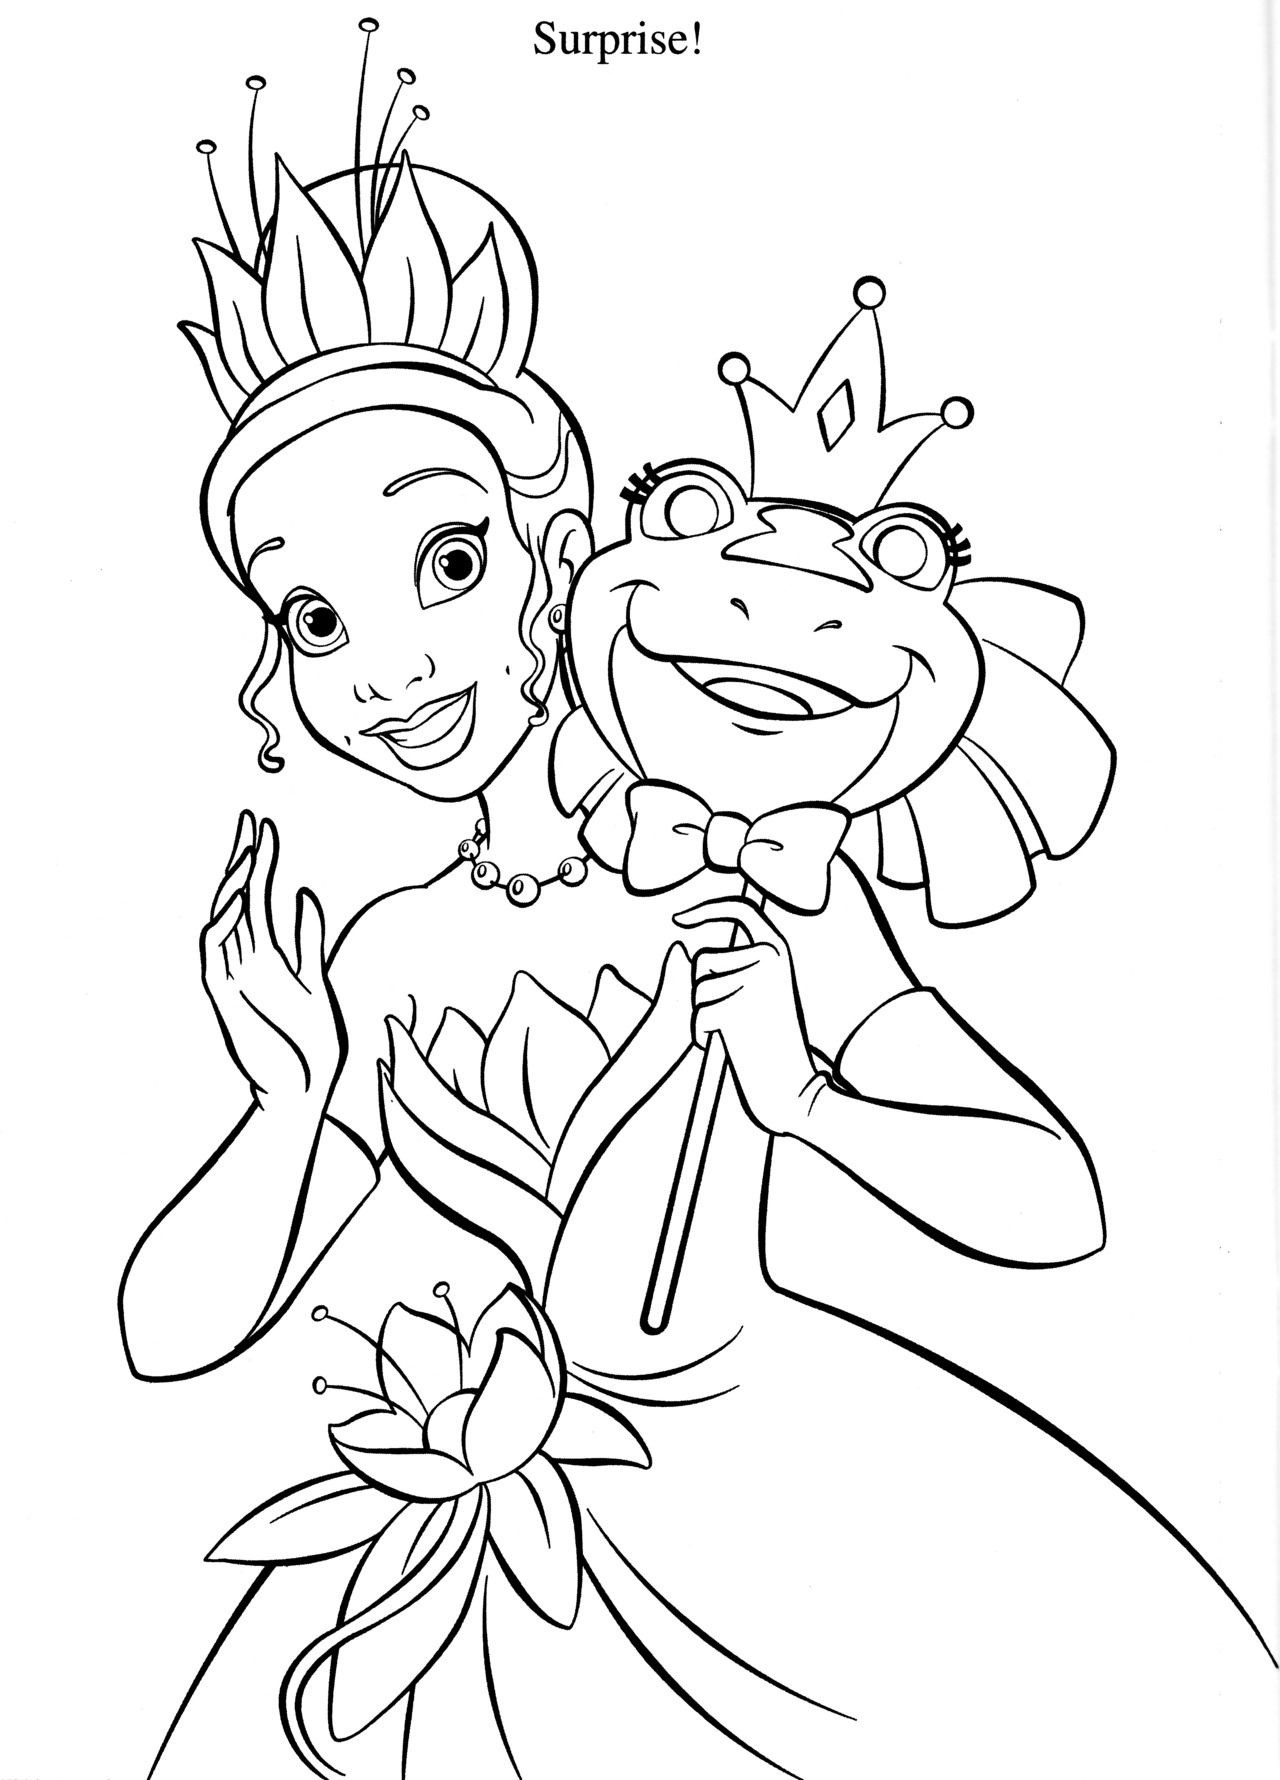 Frog Coloring Pages Luxury New Tiana Coloring Sheet Collection